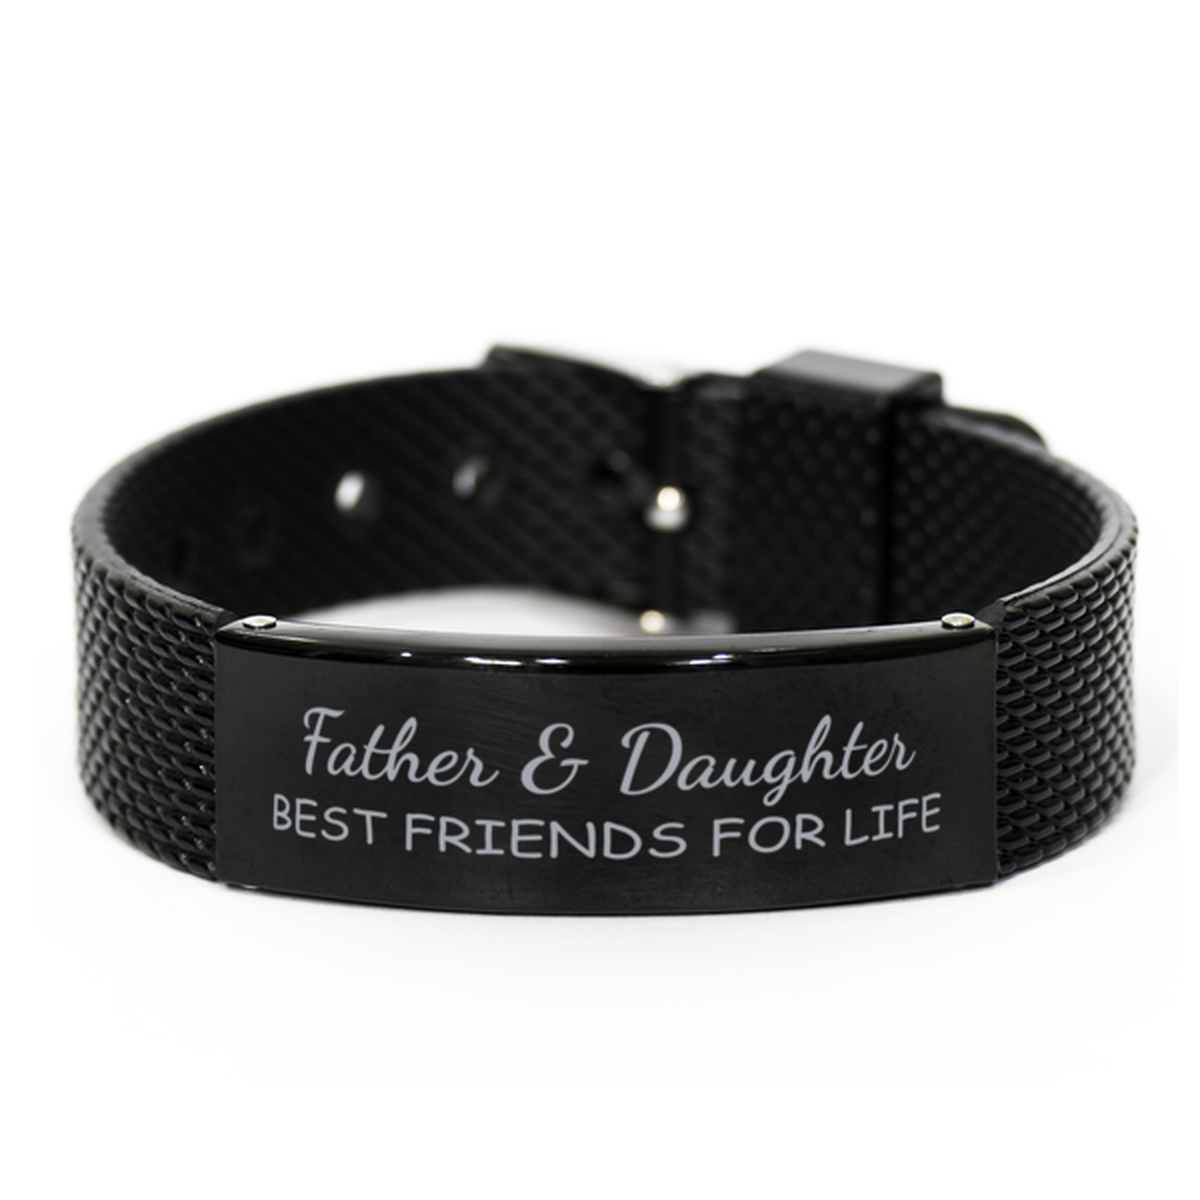 Father and Daughter Best Friends for Life Bracelet, Father Daughter Bracelet, Black Stainless Steel Leather Bracelet, Birthday, Christmas.